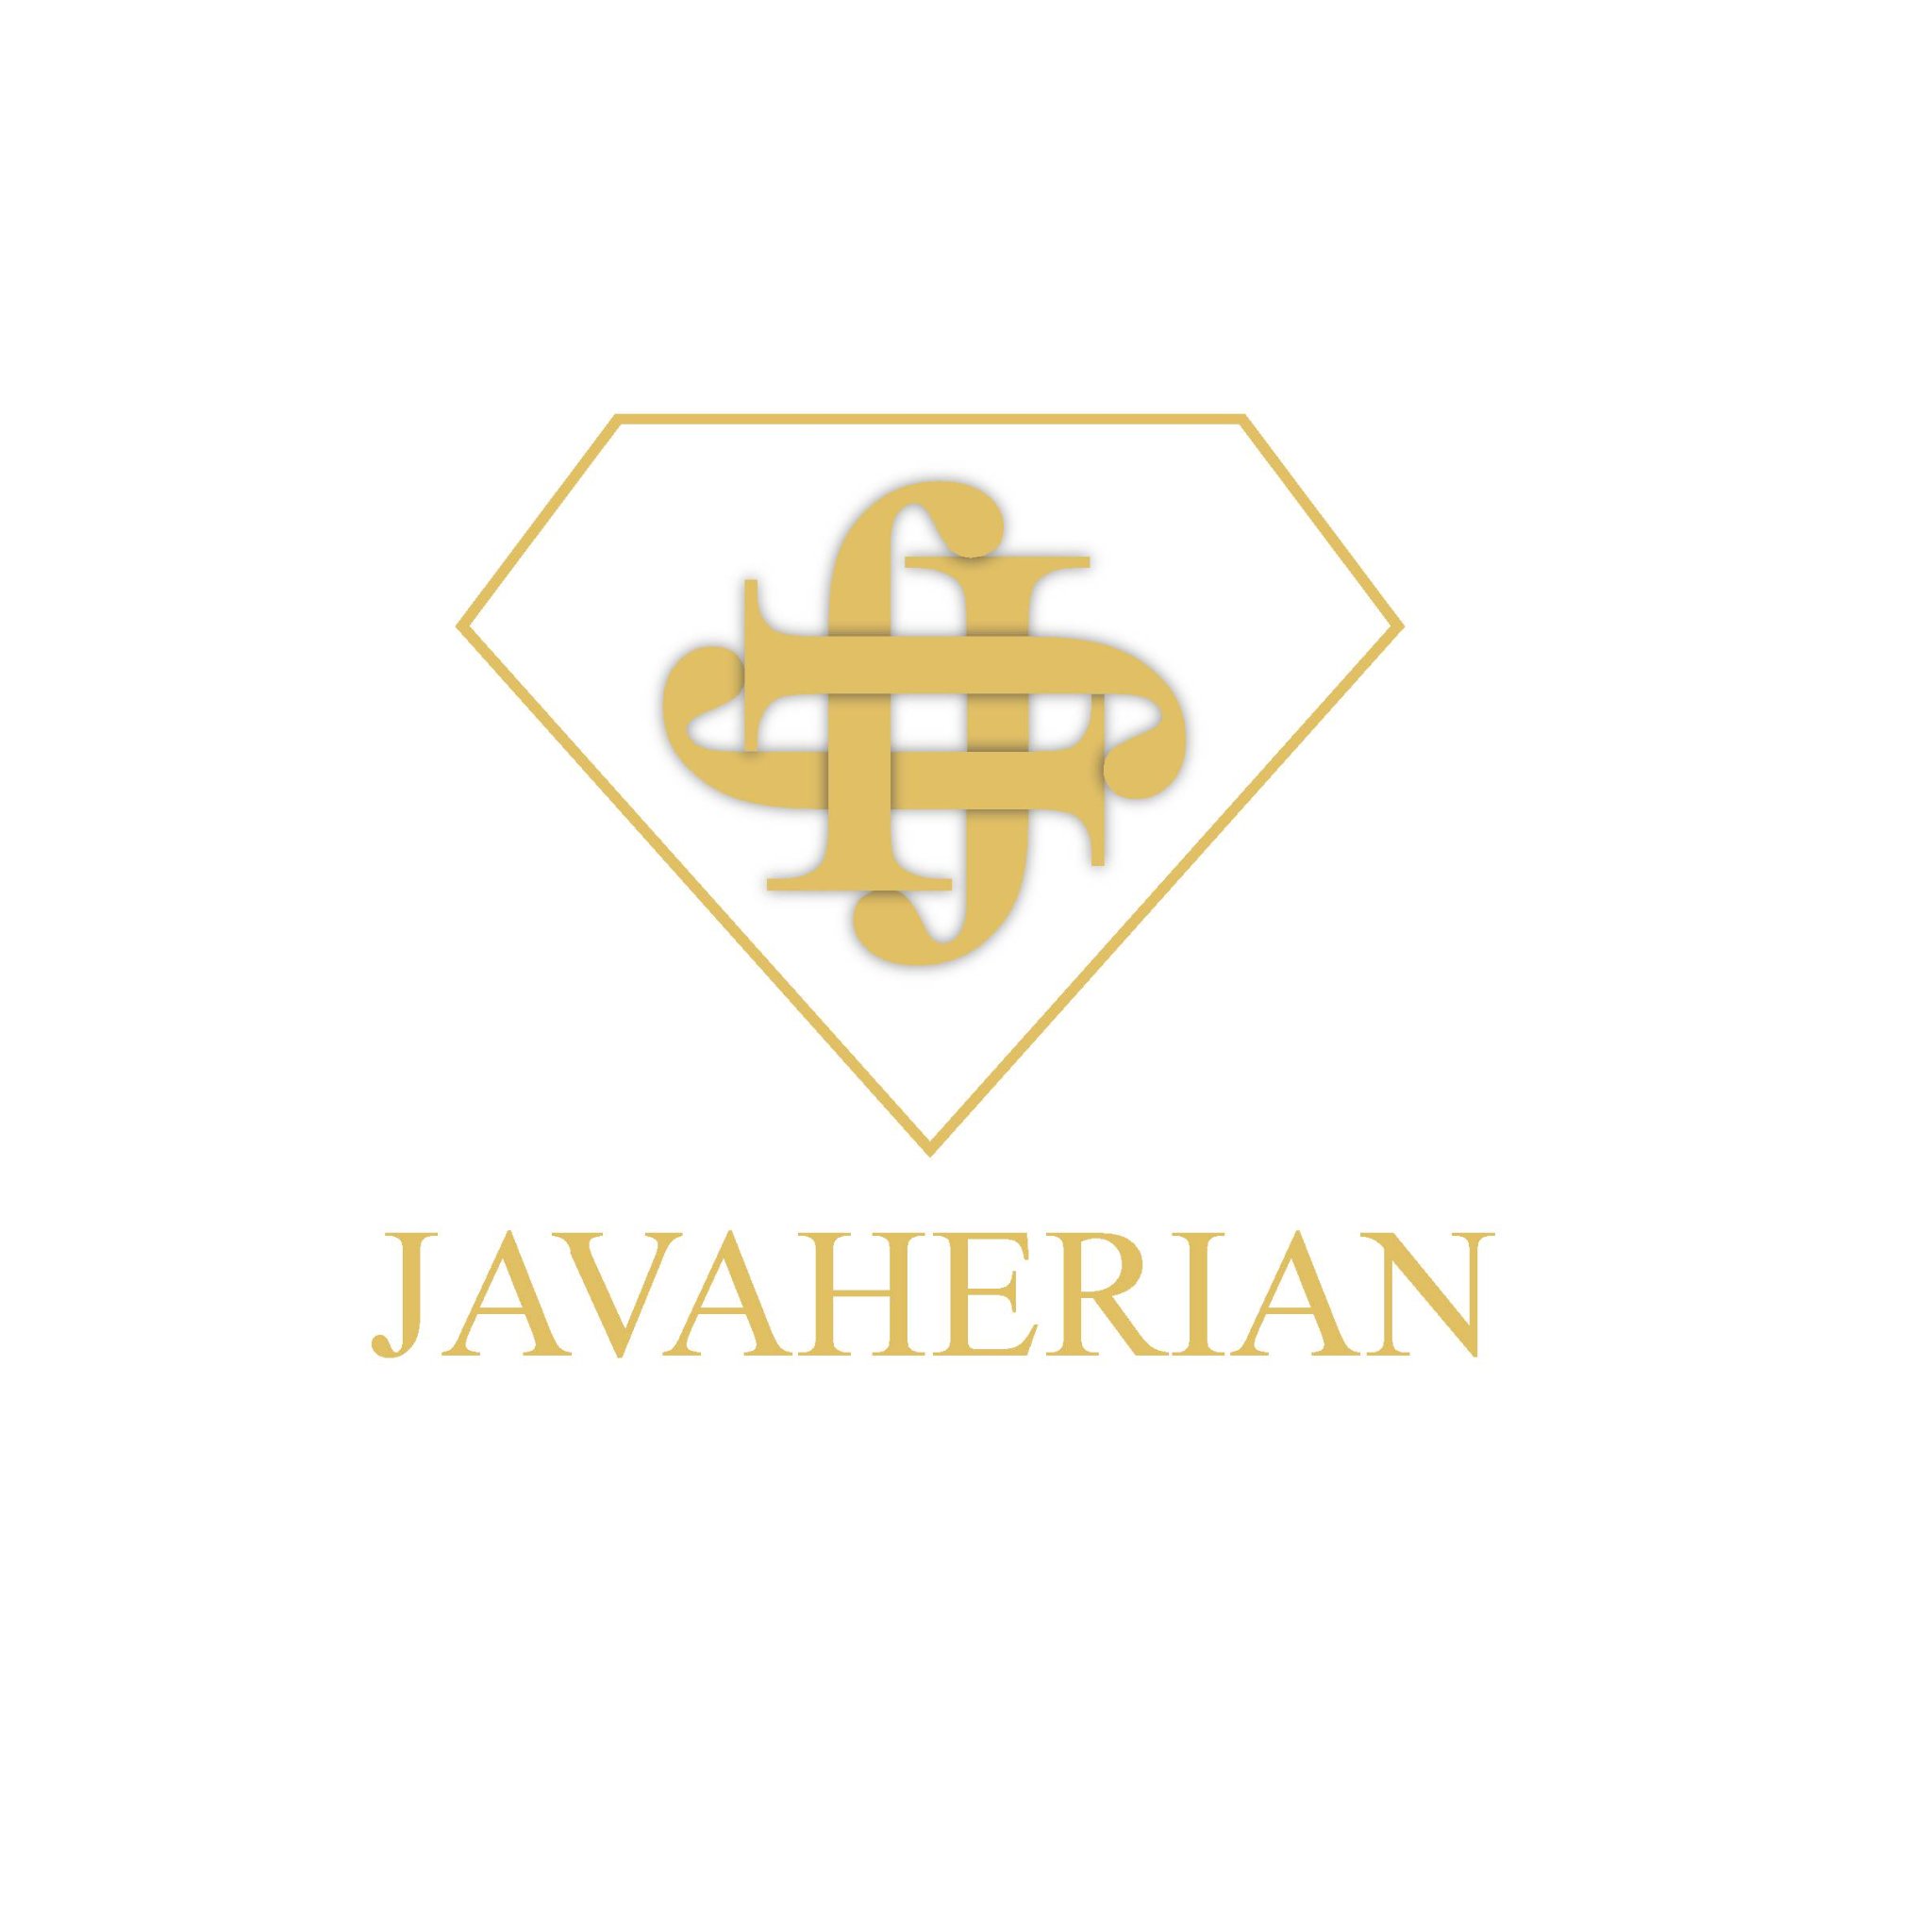 Javaherian is a fine jewelry company born in Iran, Helping you provide the best quality jewels for your loved ones since 1925.